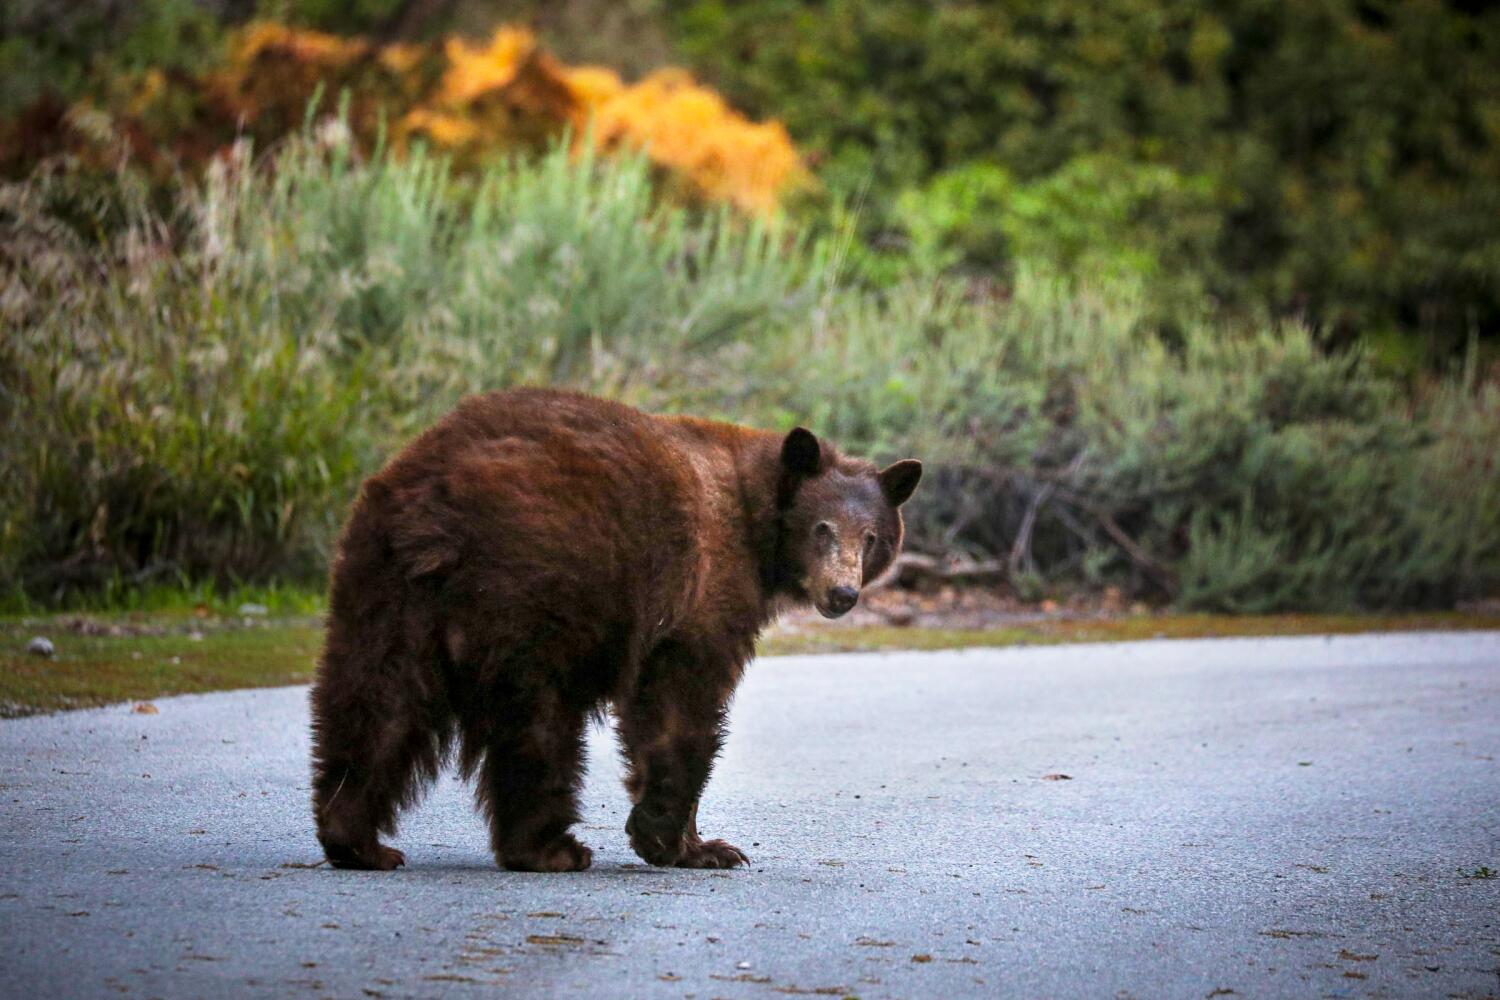 Opinion: California’s bears are thriving. Here’s the case for letting hunters kill more of them